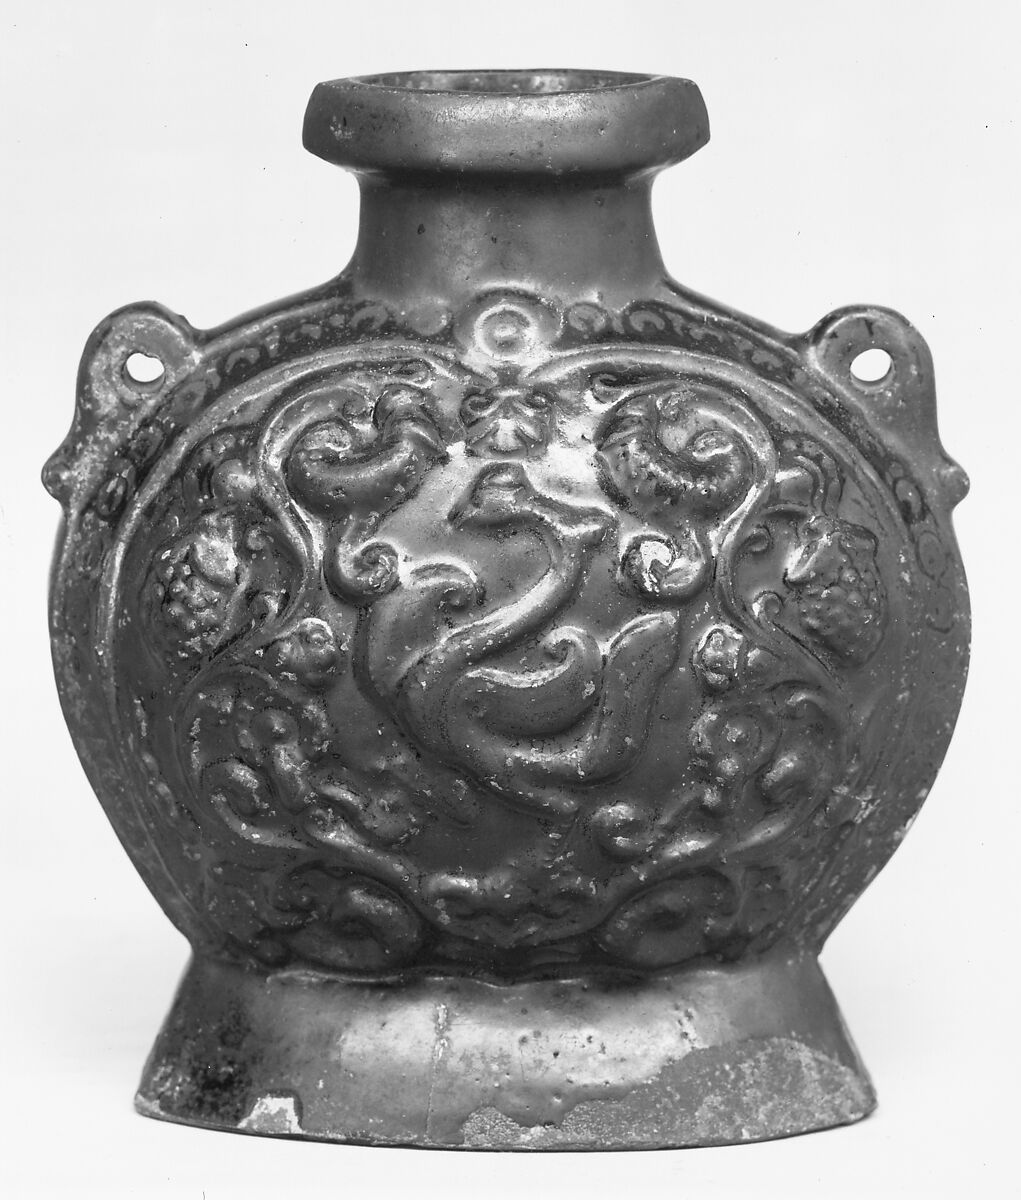 Flask with molded decoration, Stoneware with molded decoration under dark brown glaze, China 